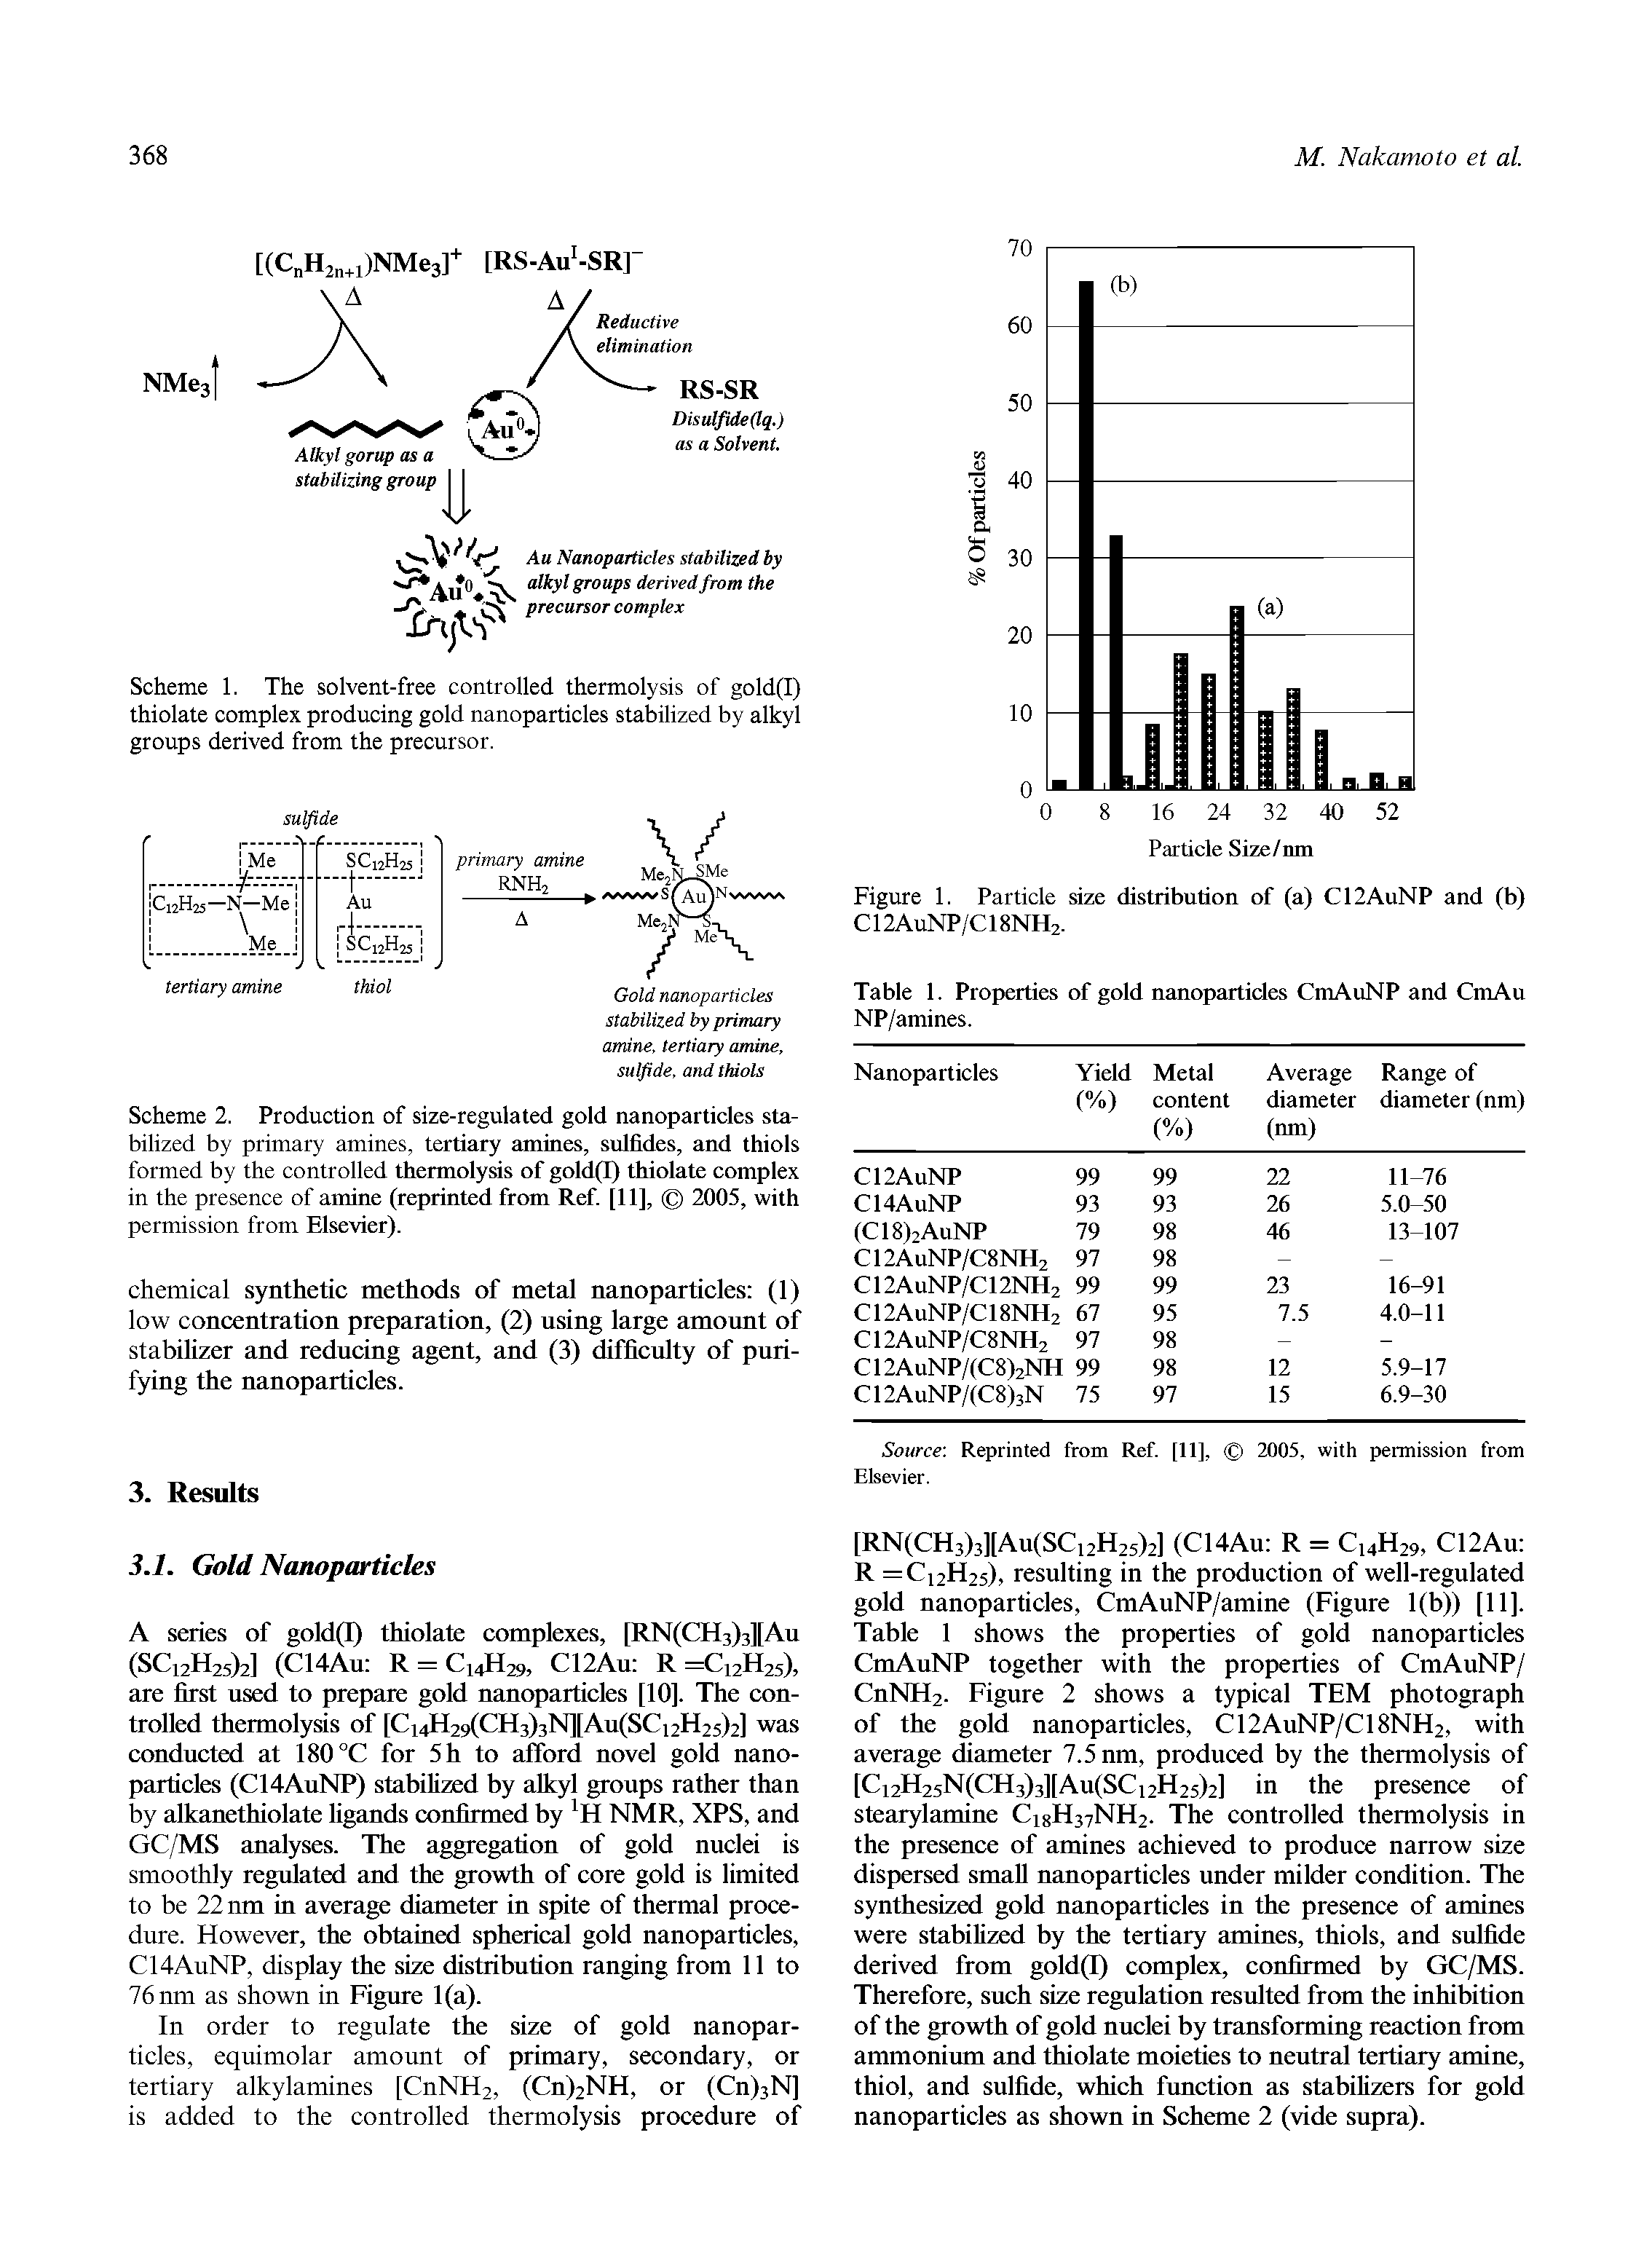 Scheme 2. Production of size-regulated gold nanoparticles stabilized by primary amines, tertiary amines, sulfides, and thiols formed by the controlled thermolysis of gold(I) thiolate complex in the presence of amine (reprinted from Ref. [11], 2005, with permission from Elsevier).